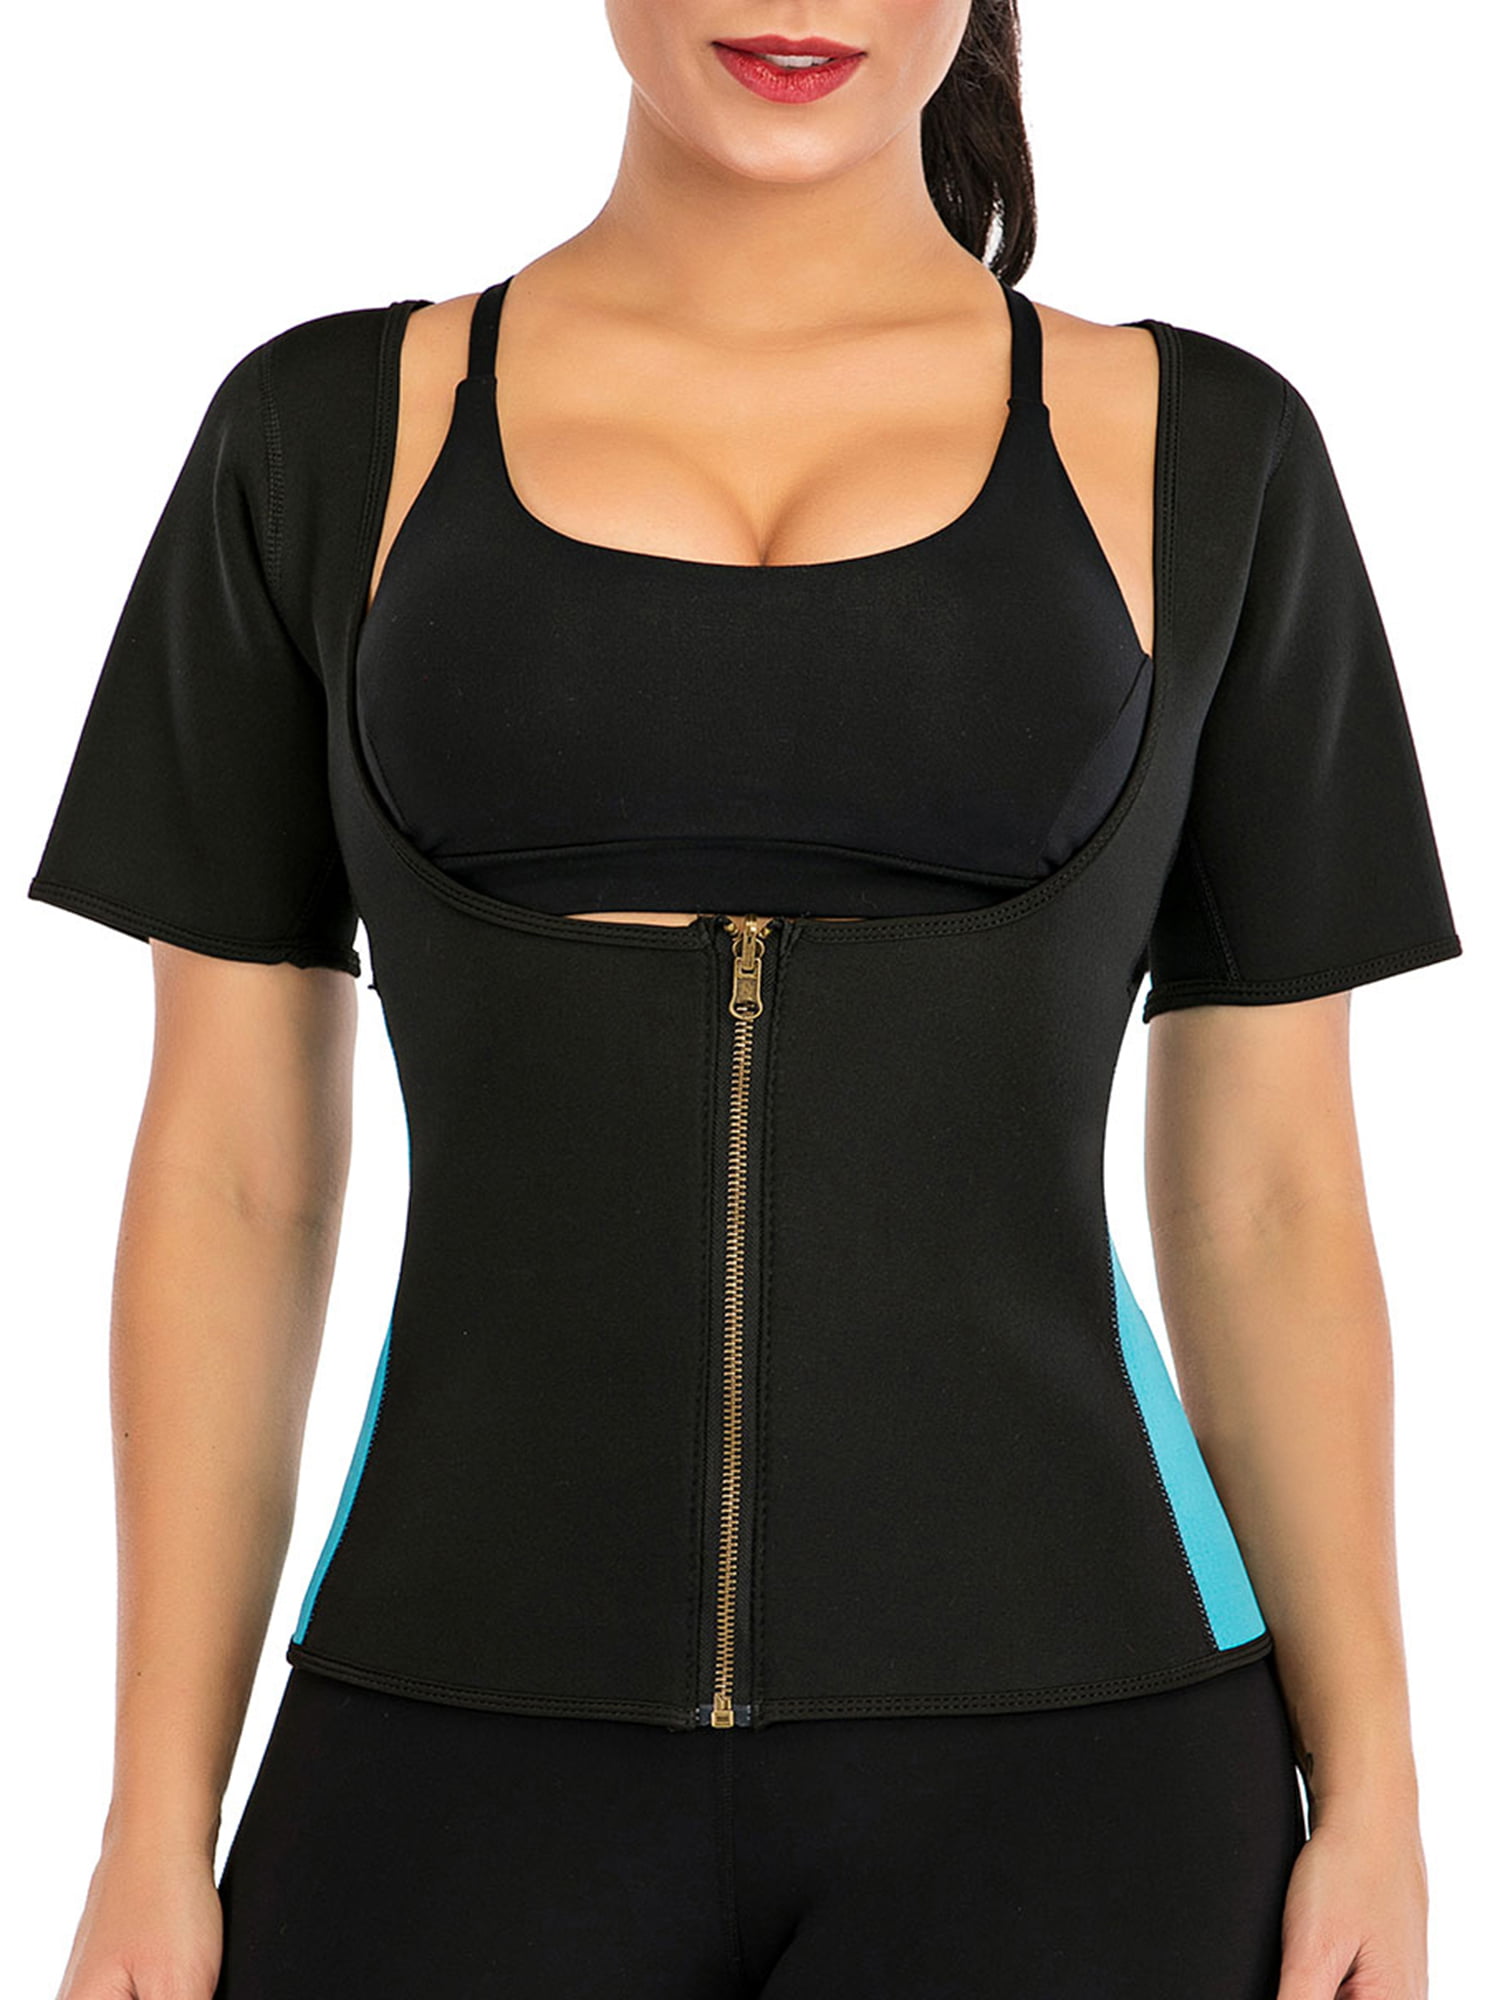 Waist Trainer Shaper Women Sweat Sauna Suits Weight Lose With Sleeves For Arms 